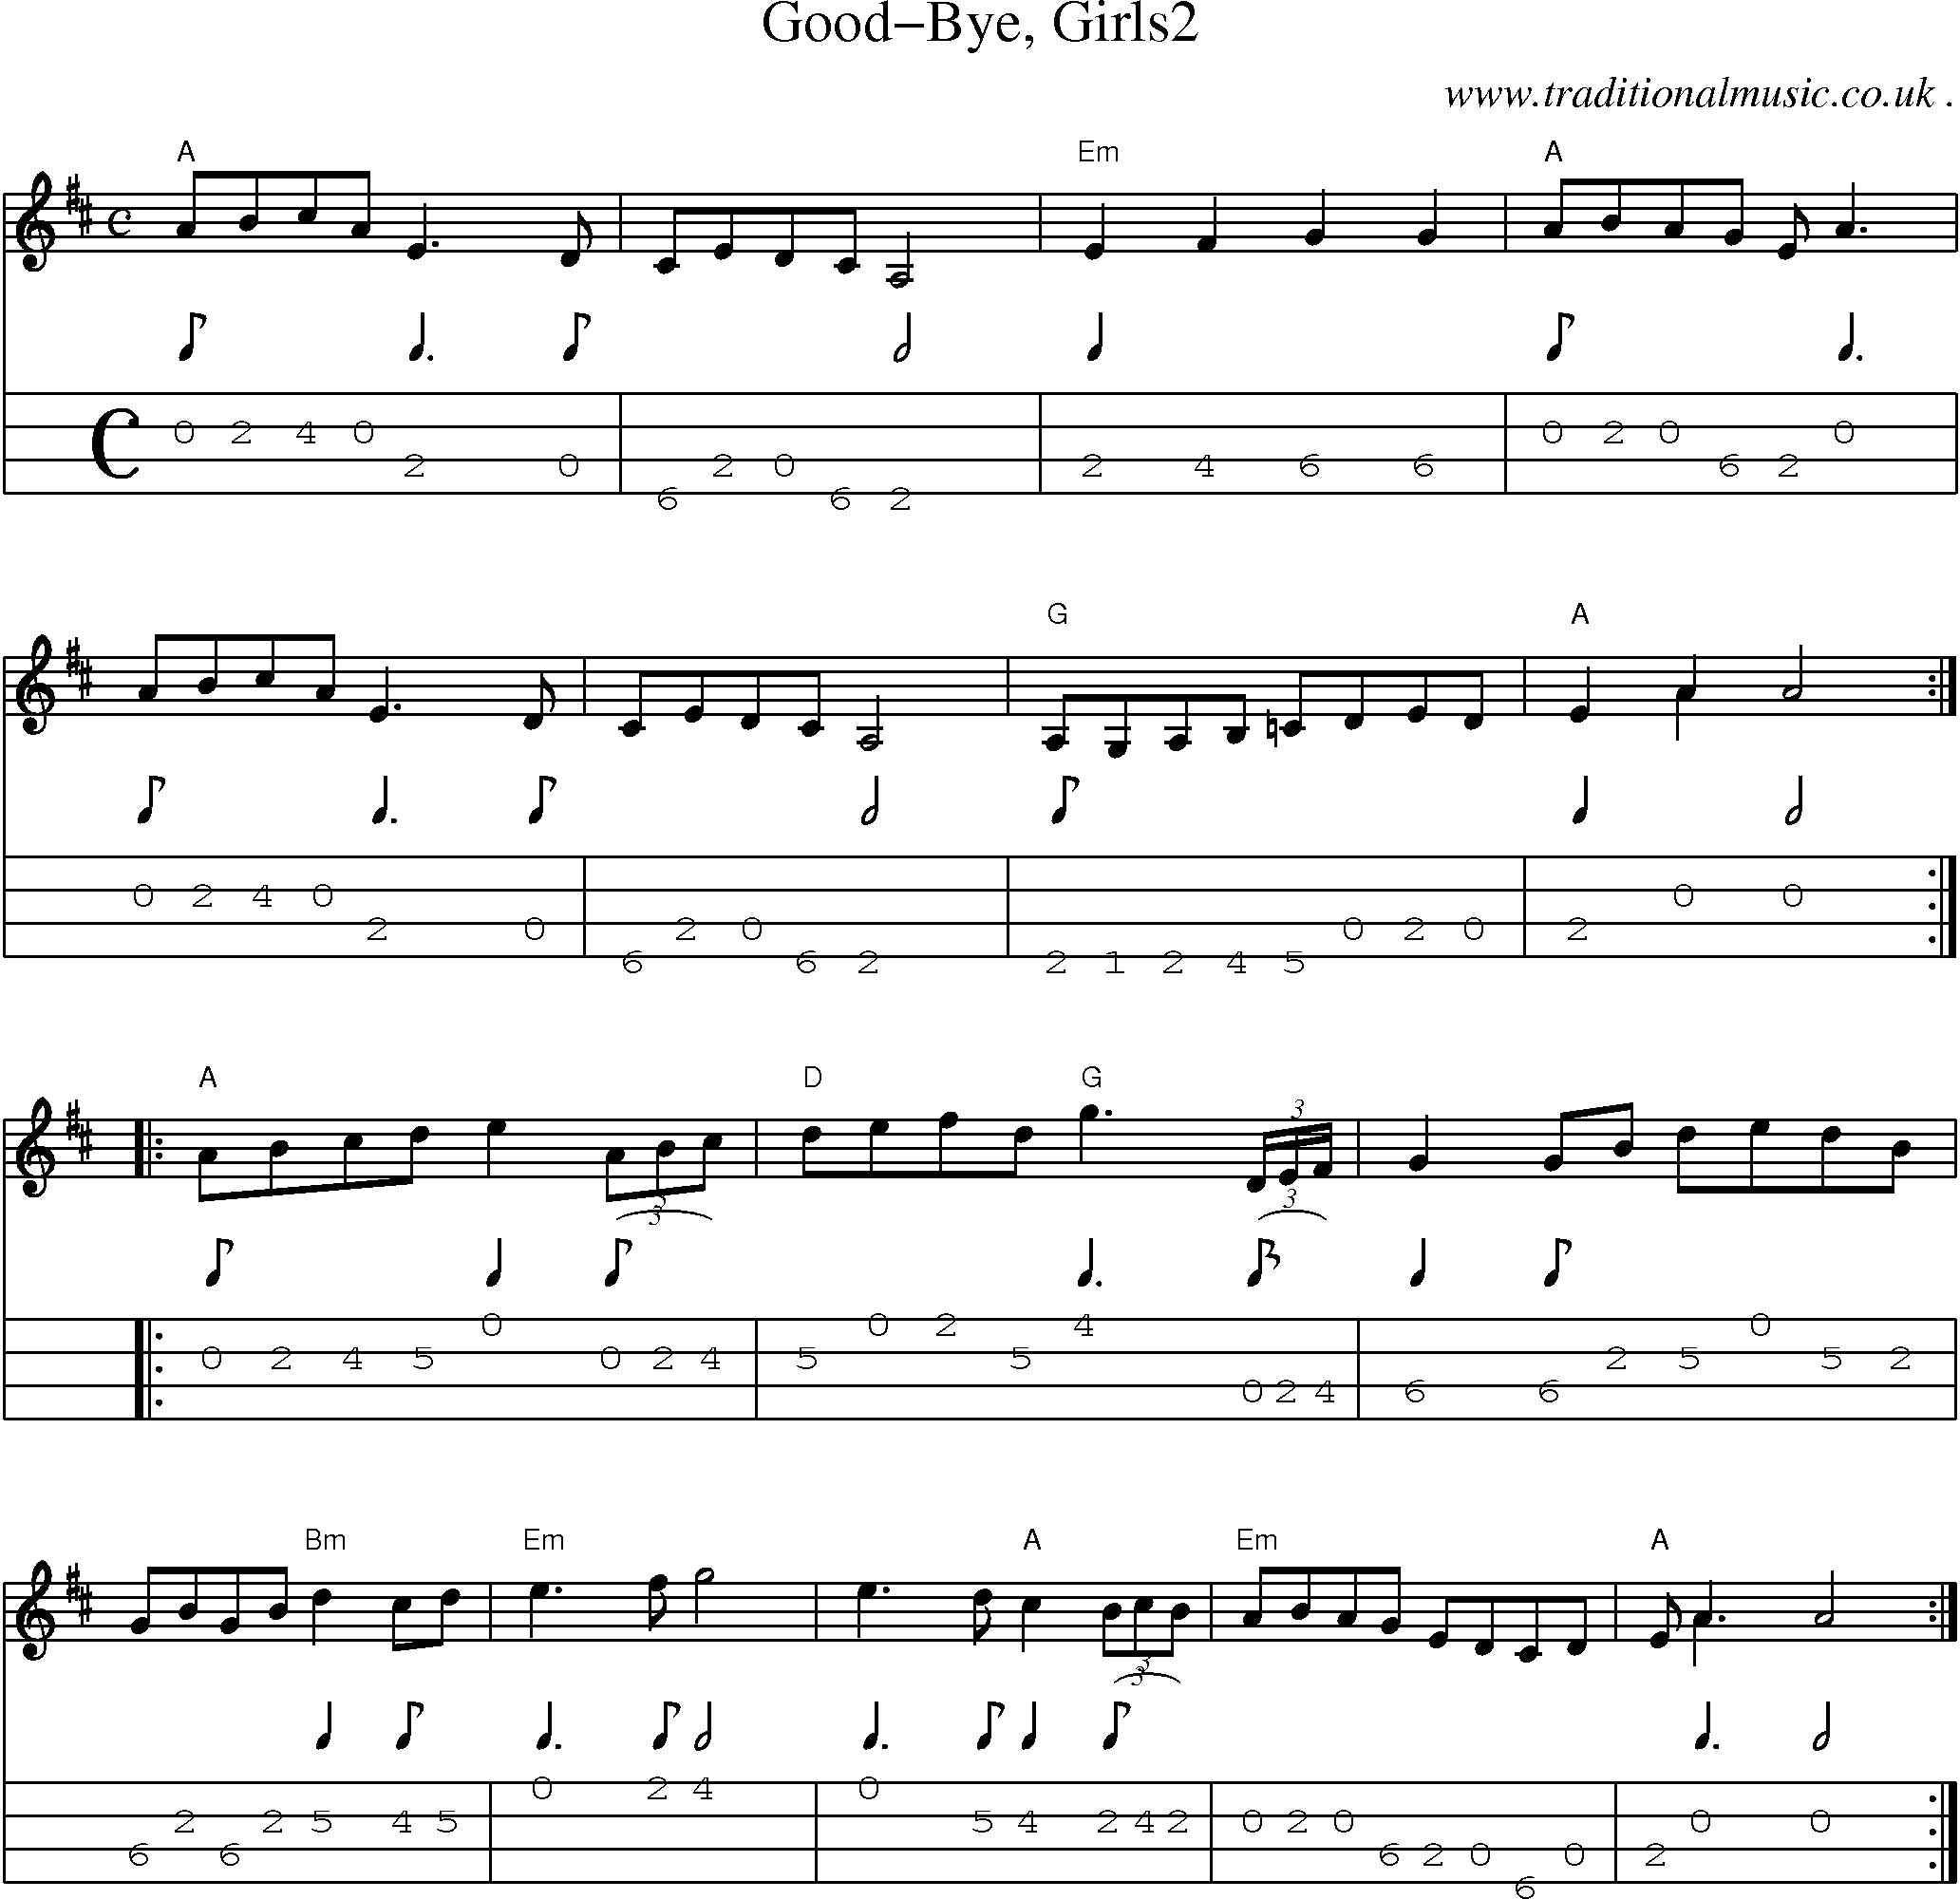 Music Score and Mandolin Tabs for Good-bye Girls2